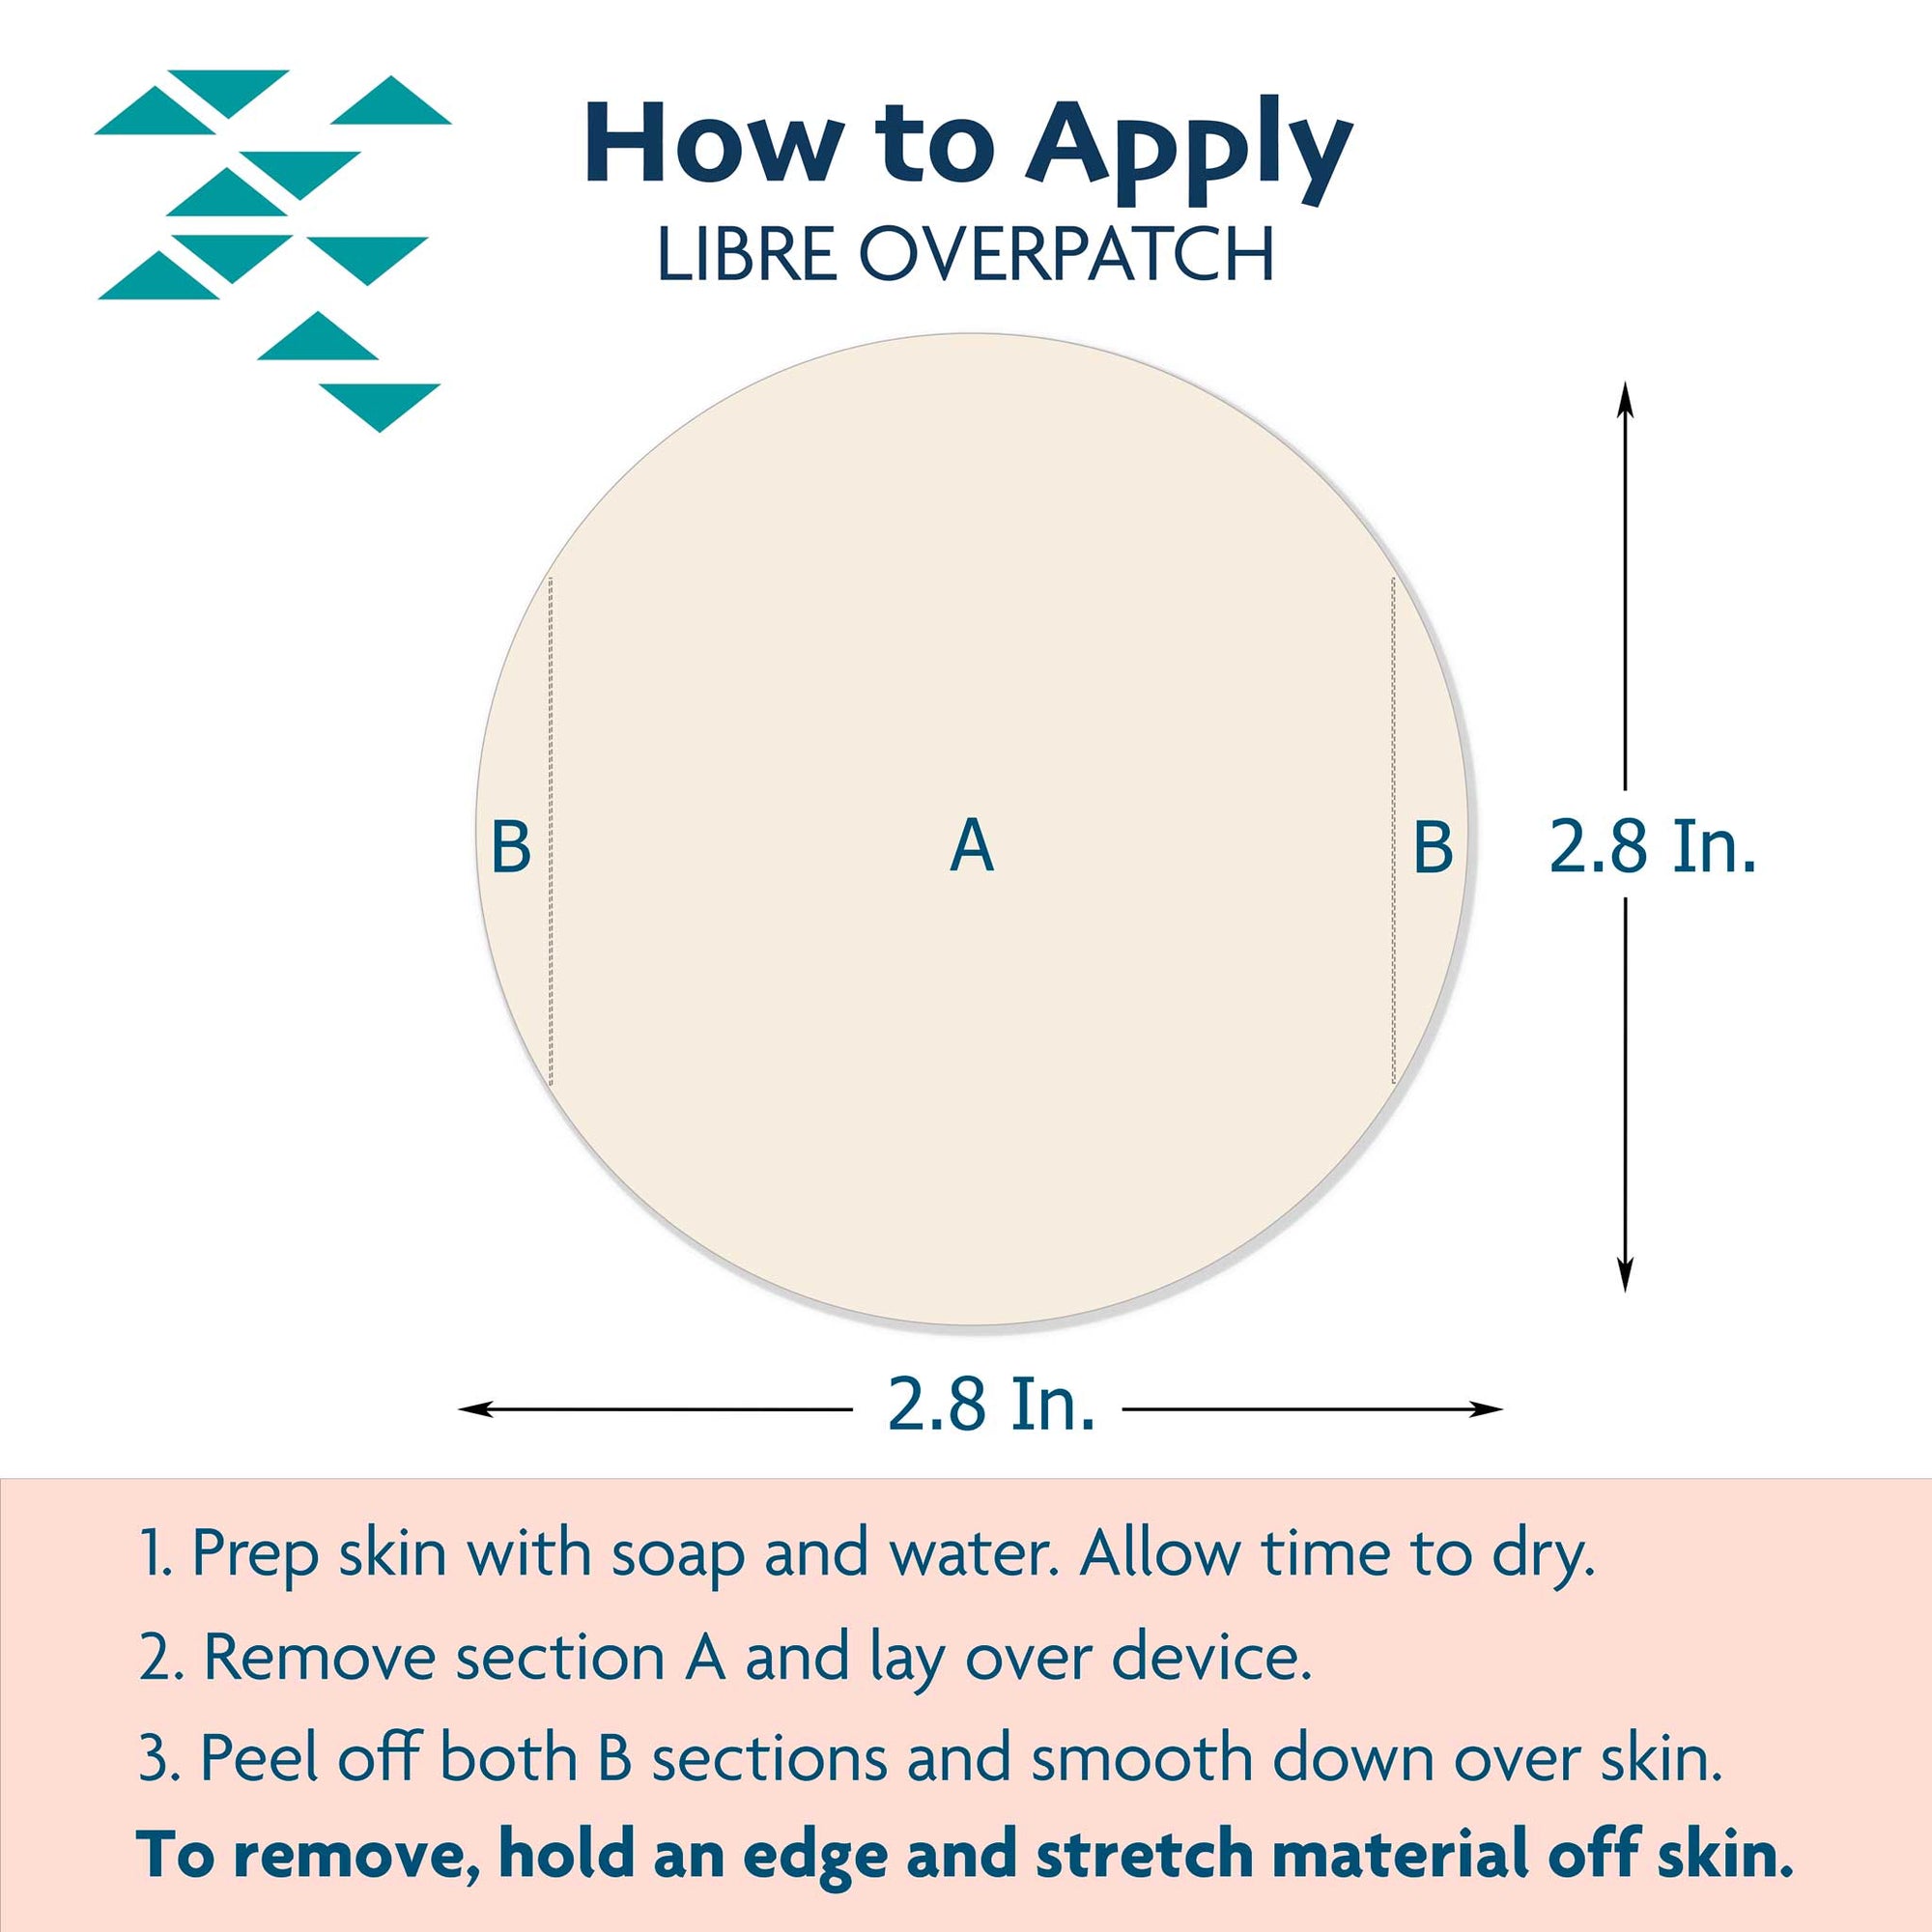 ExpressionMed Freestyle Libre Overpatch application instructions